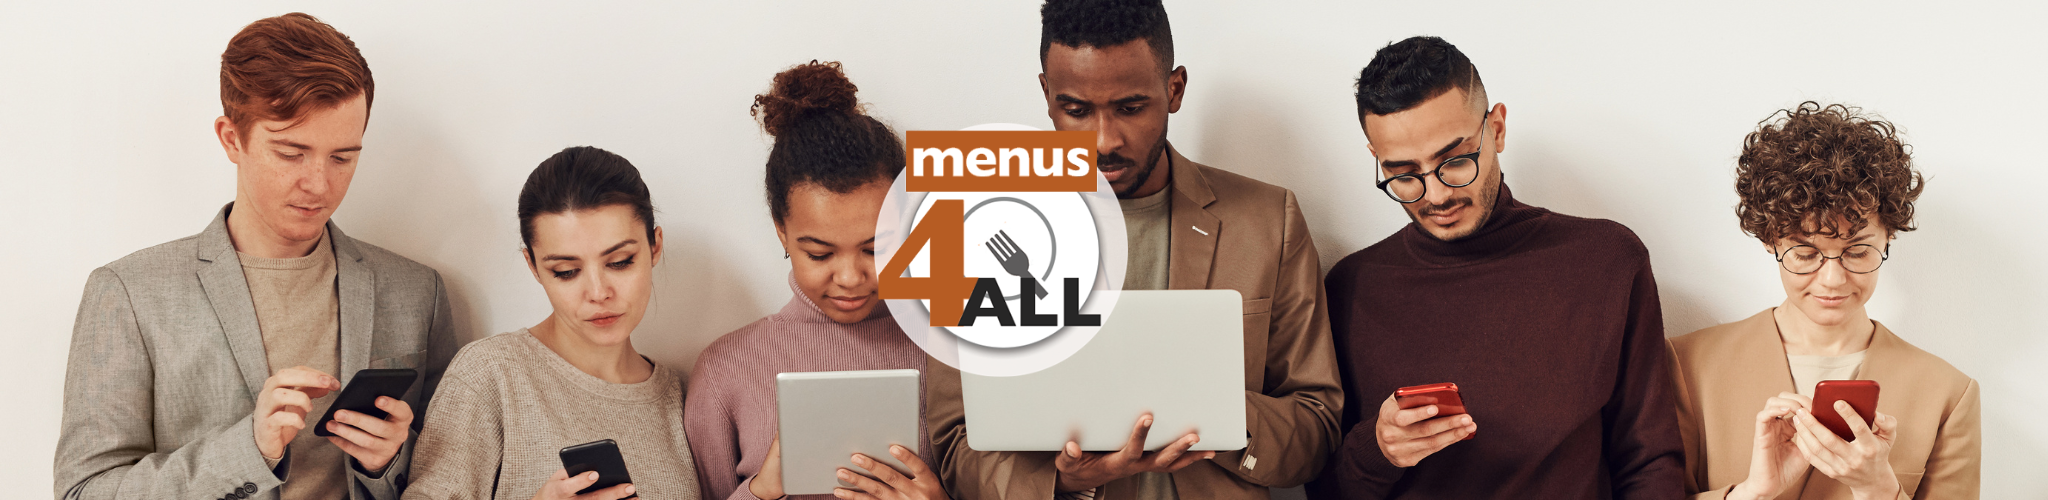 8 People reading on phones, a table and a laptop. Plus Menus 4 ALL logo.